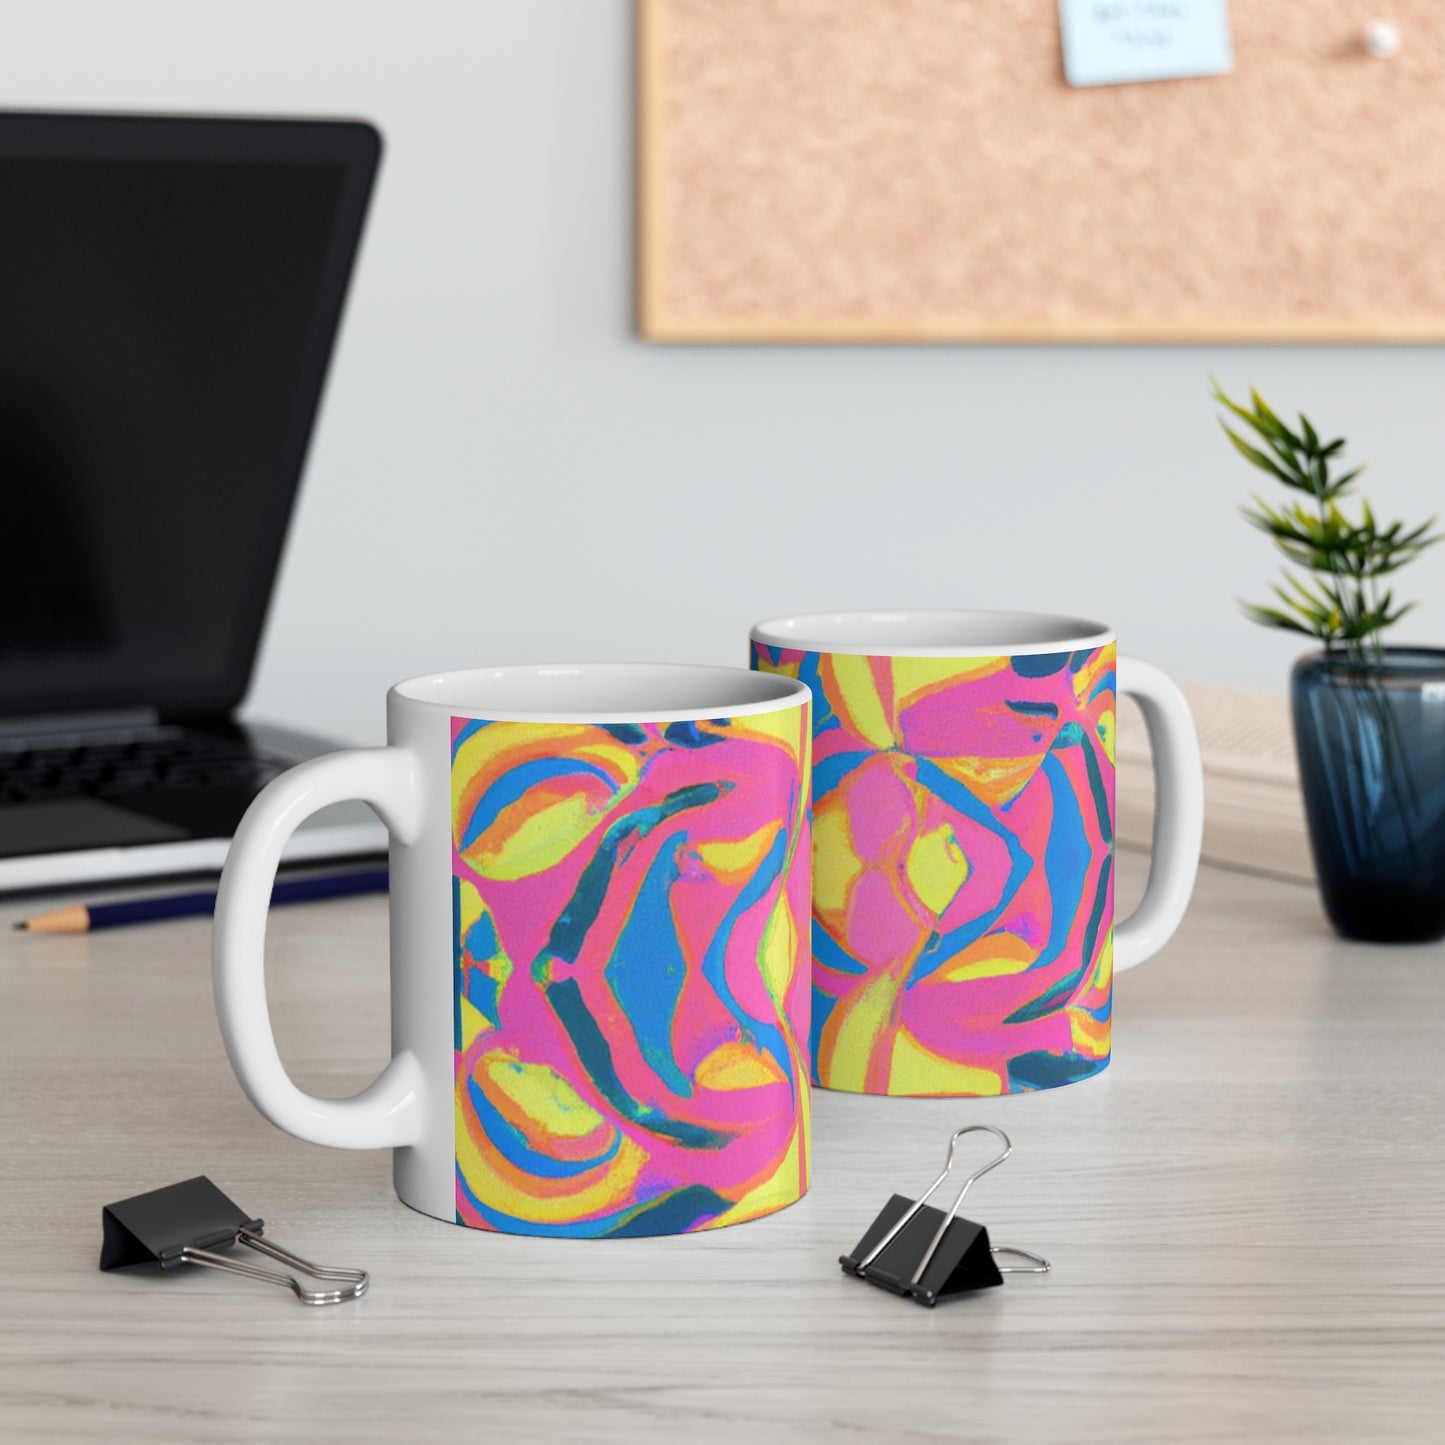 Brewmaster Frankie - Psychedelic Coffee Cup Mug 11 Ounce